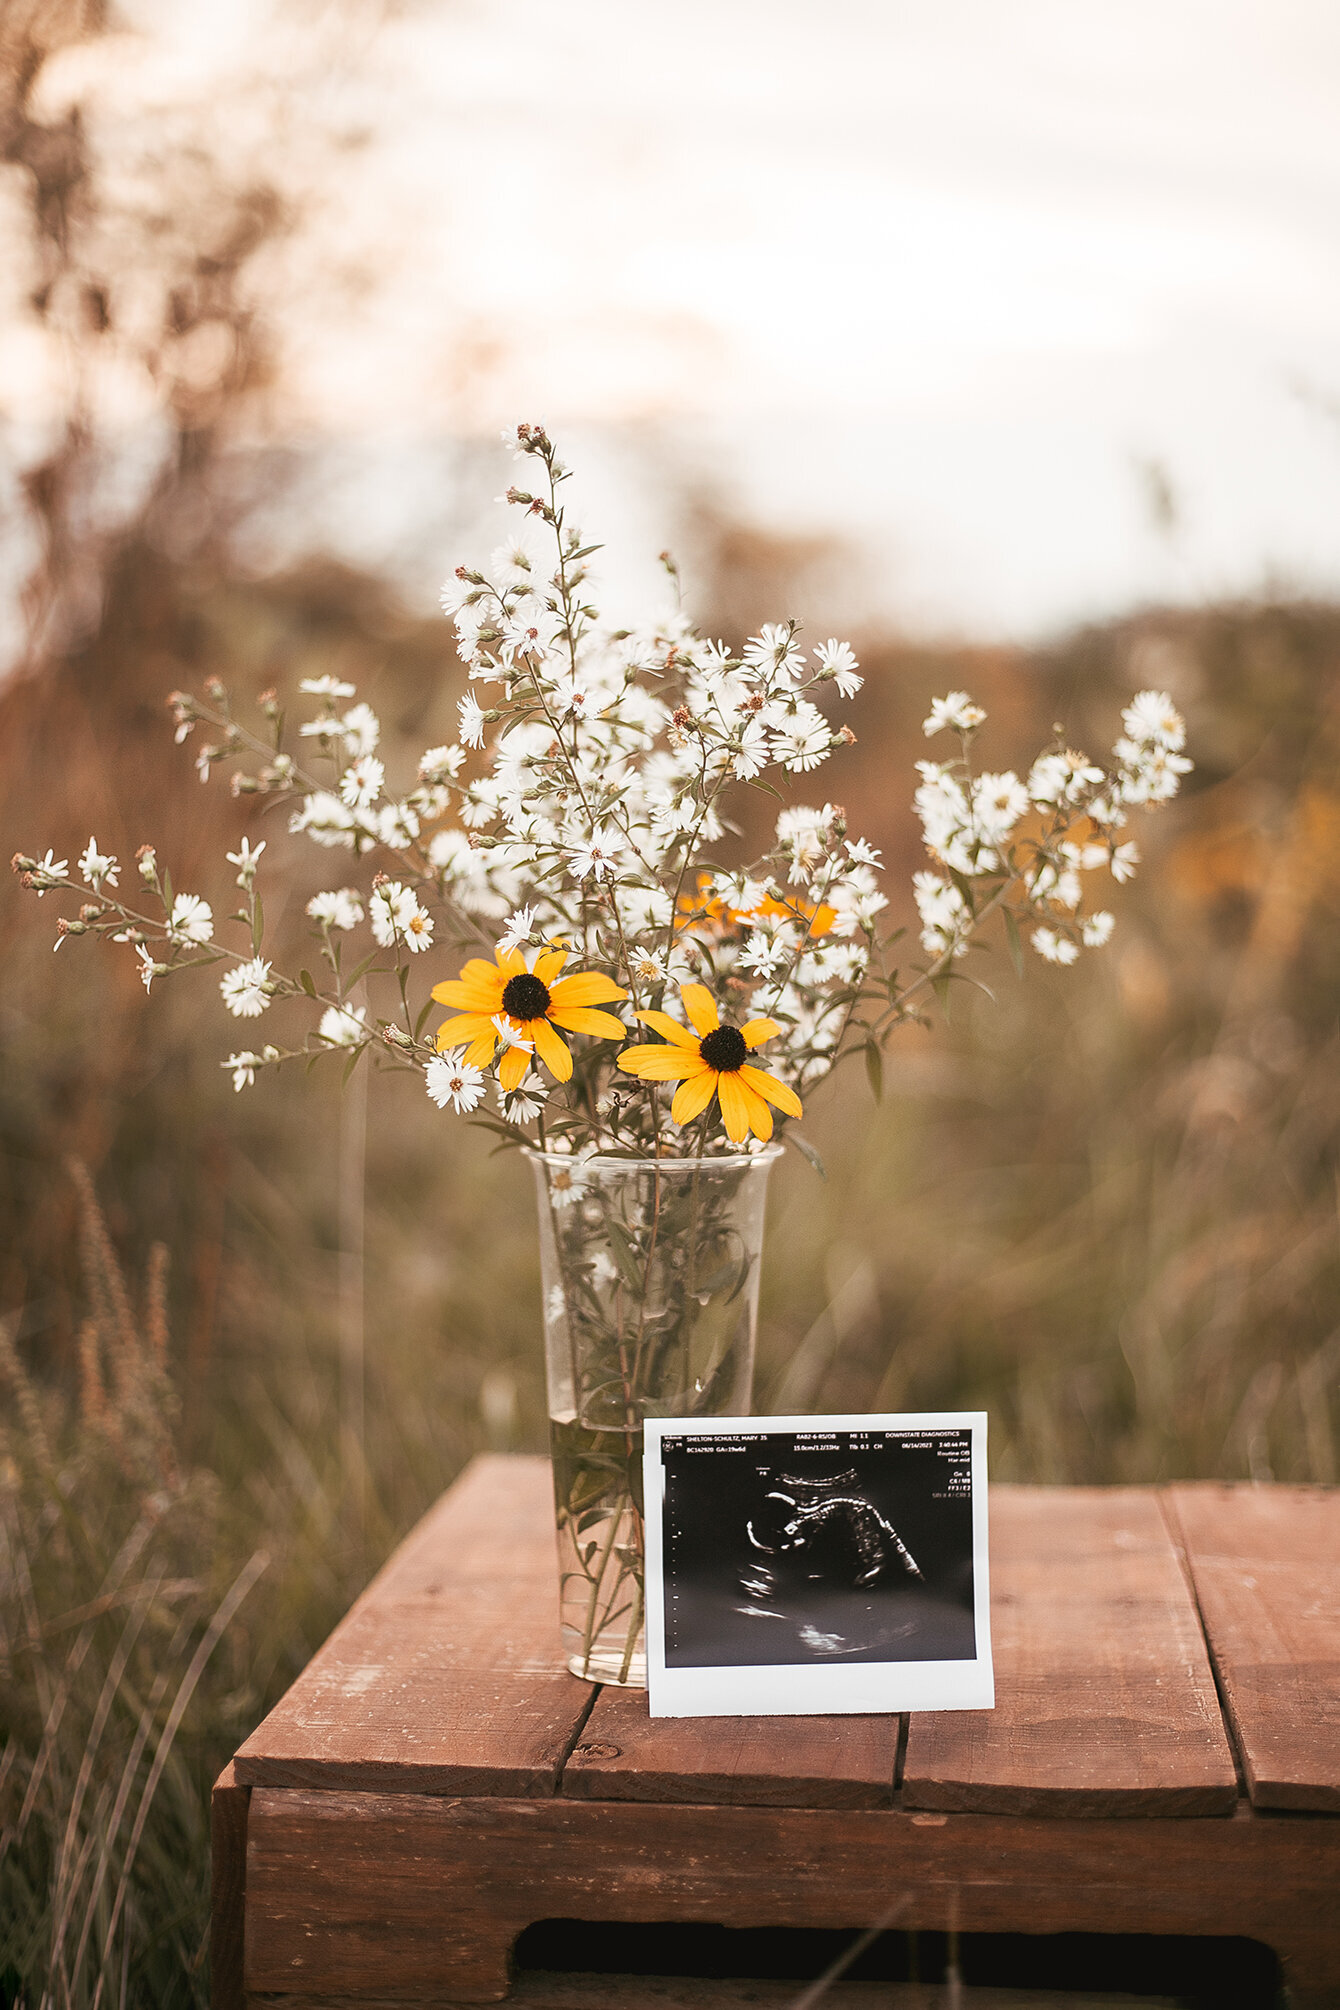 Wooden crate. On top clear plastic cup with wildflowers a sonogram image leaning against it. Background blurry meadow. Maternity Portrait Photography.